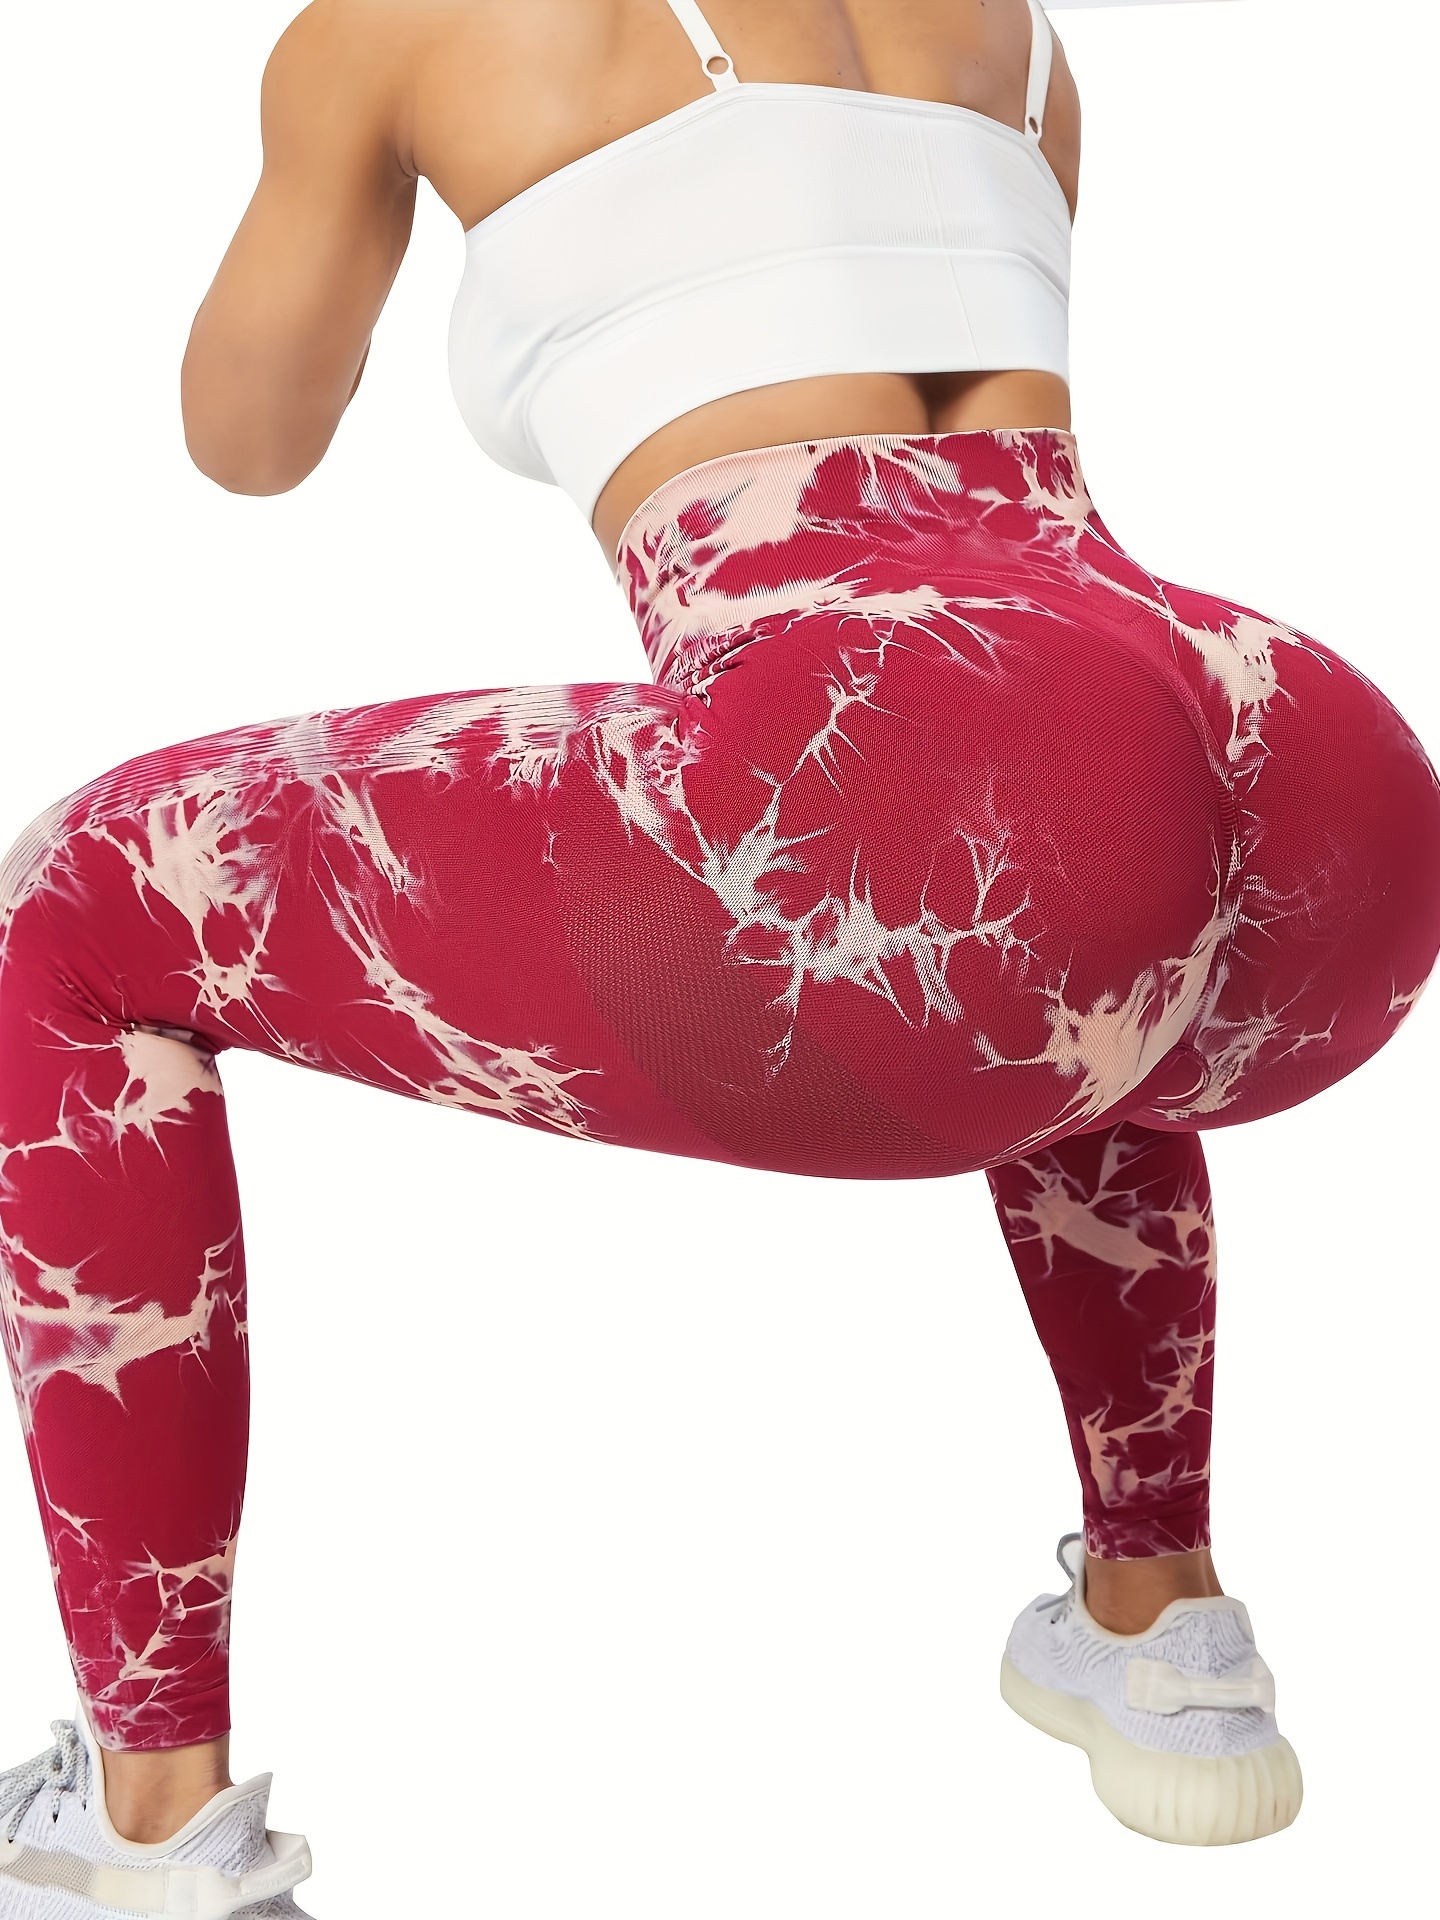 Dragon Fit High Waist Yoga Pants for Women Butt Lifting Gym Workout Running  Leggings with Pockets